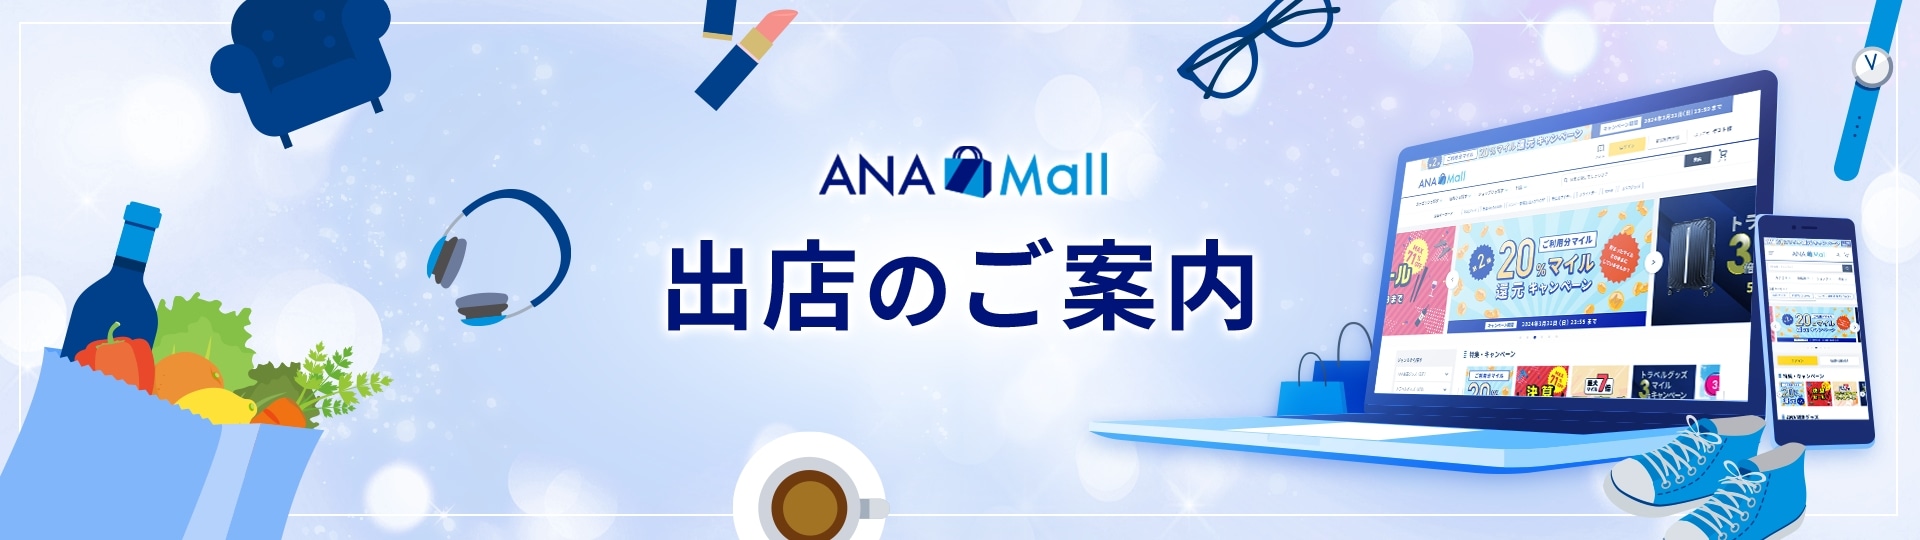 ANA Mall 出店のご案内